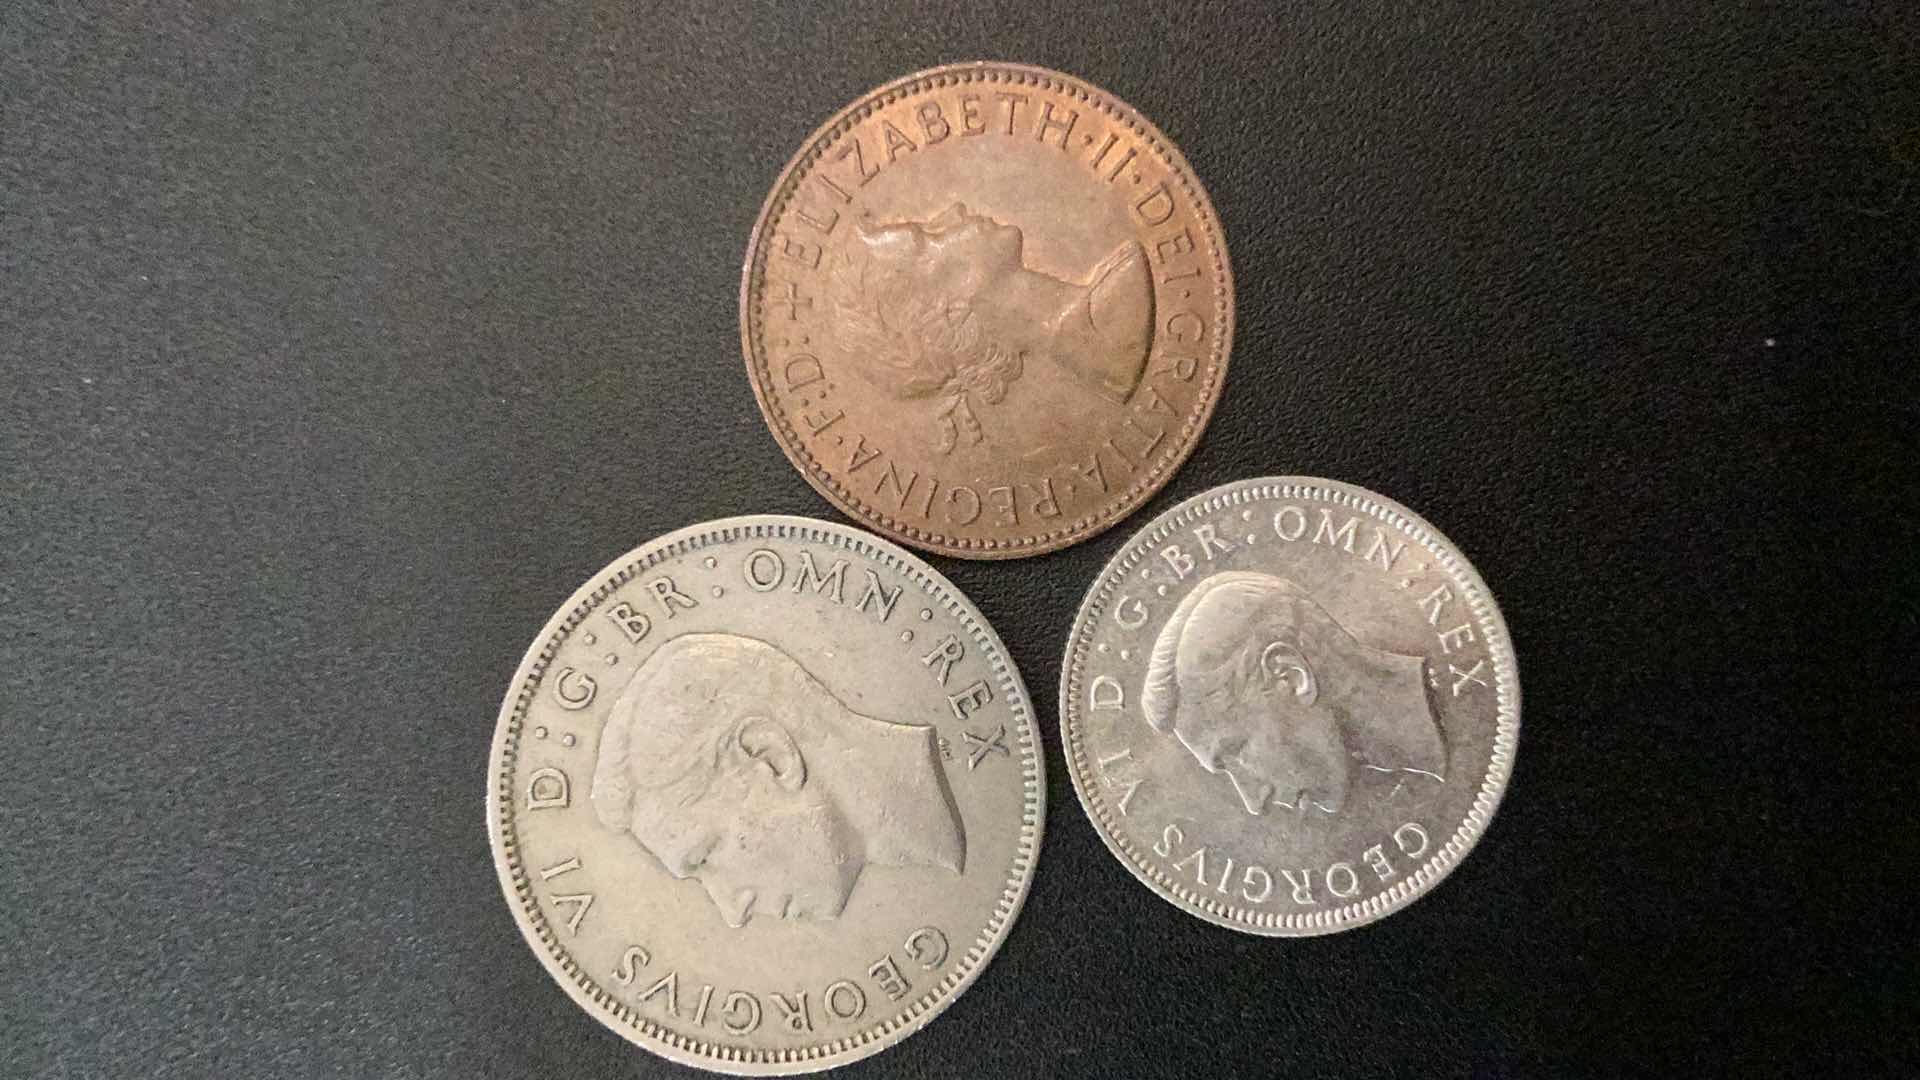 Photo 2 of 3 COLLECTIBLE COINS - GREAT BRITAIN 1945, 1950, 1967